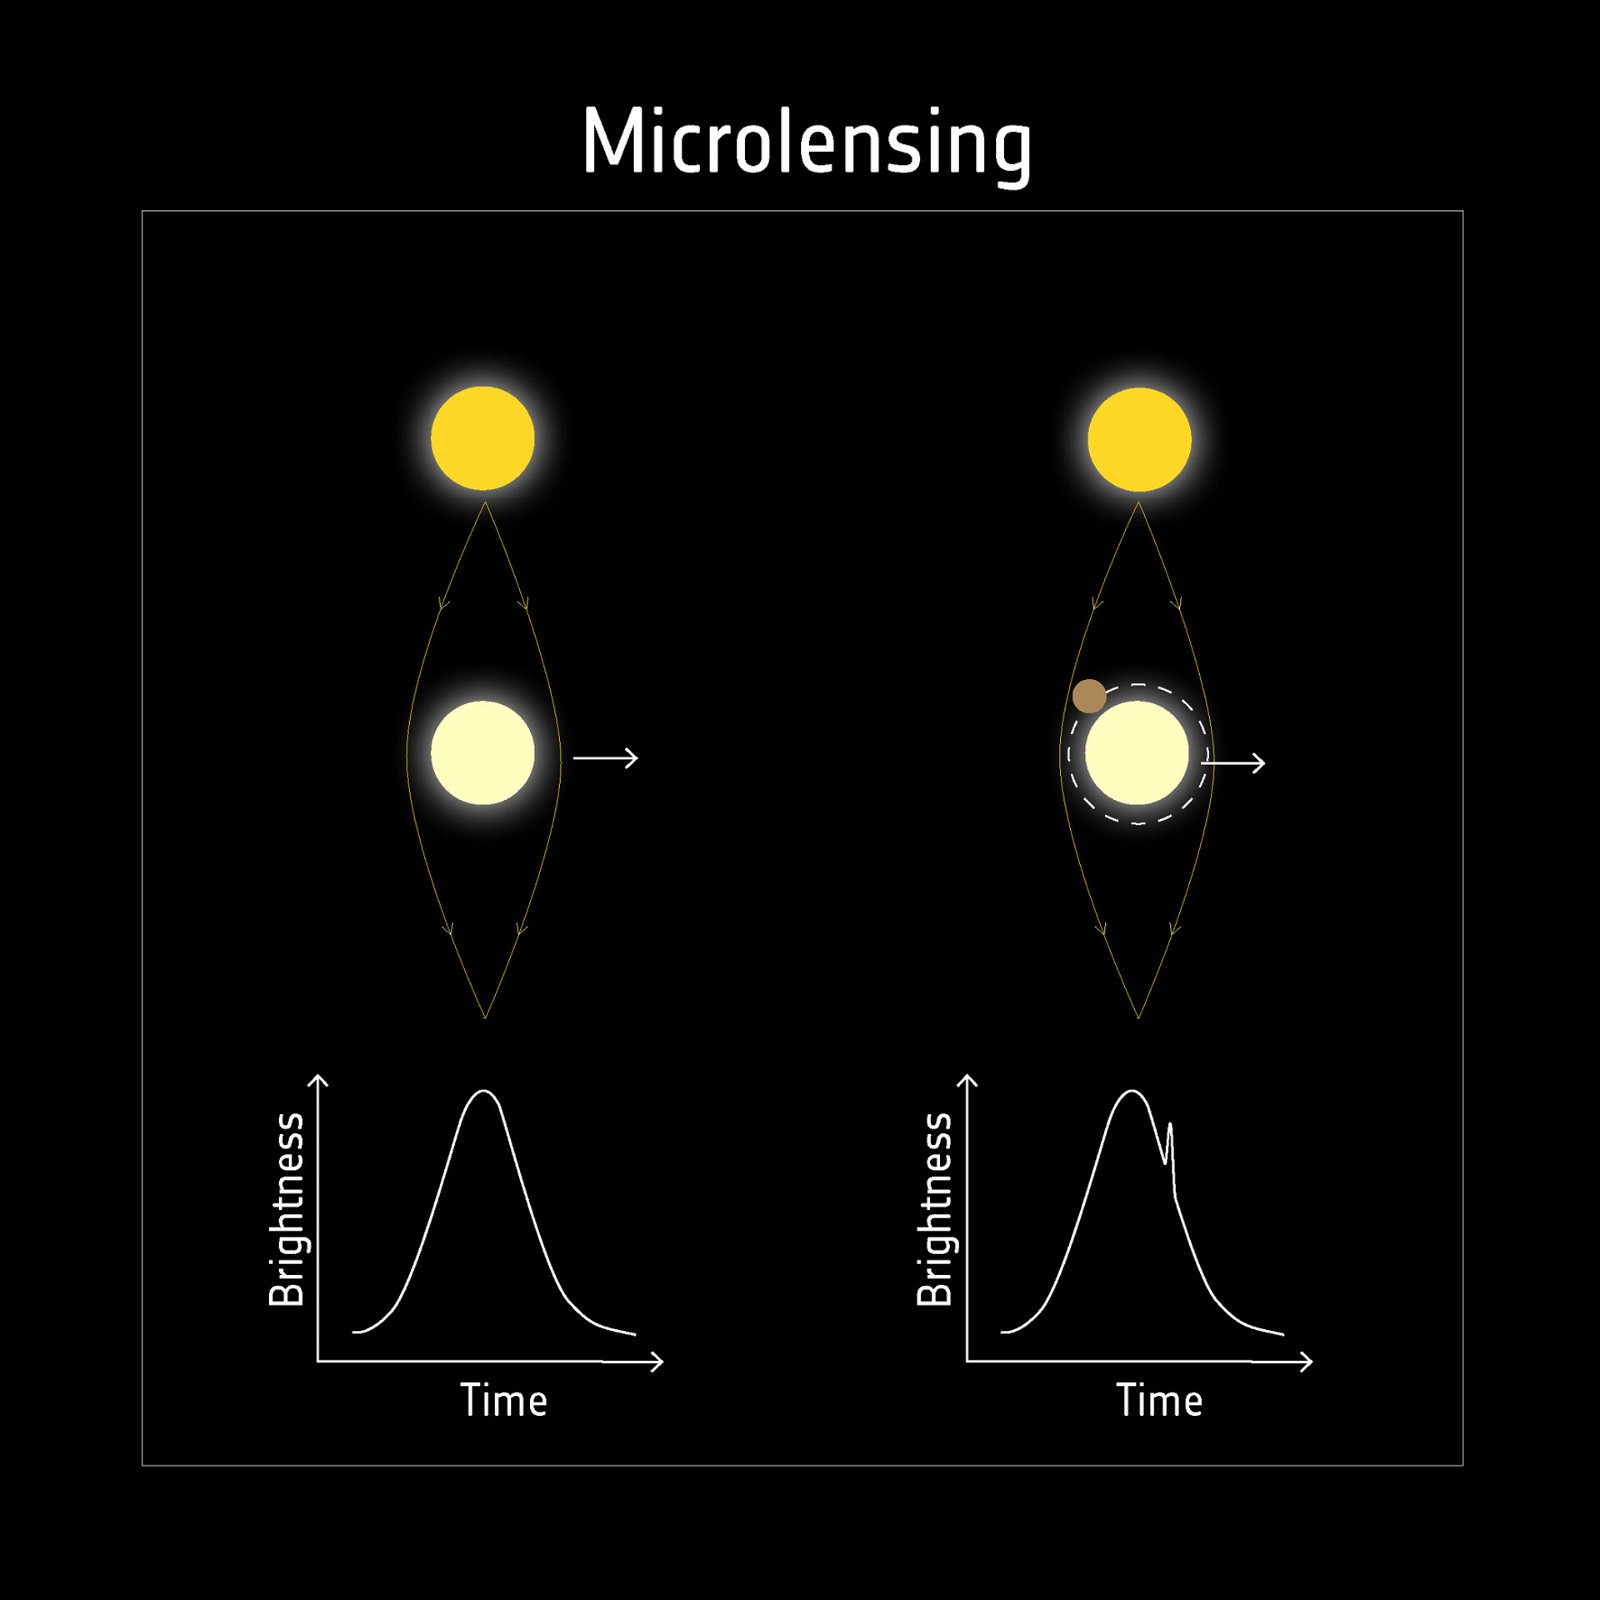 ESA - Detecting exoplanets with microlensing